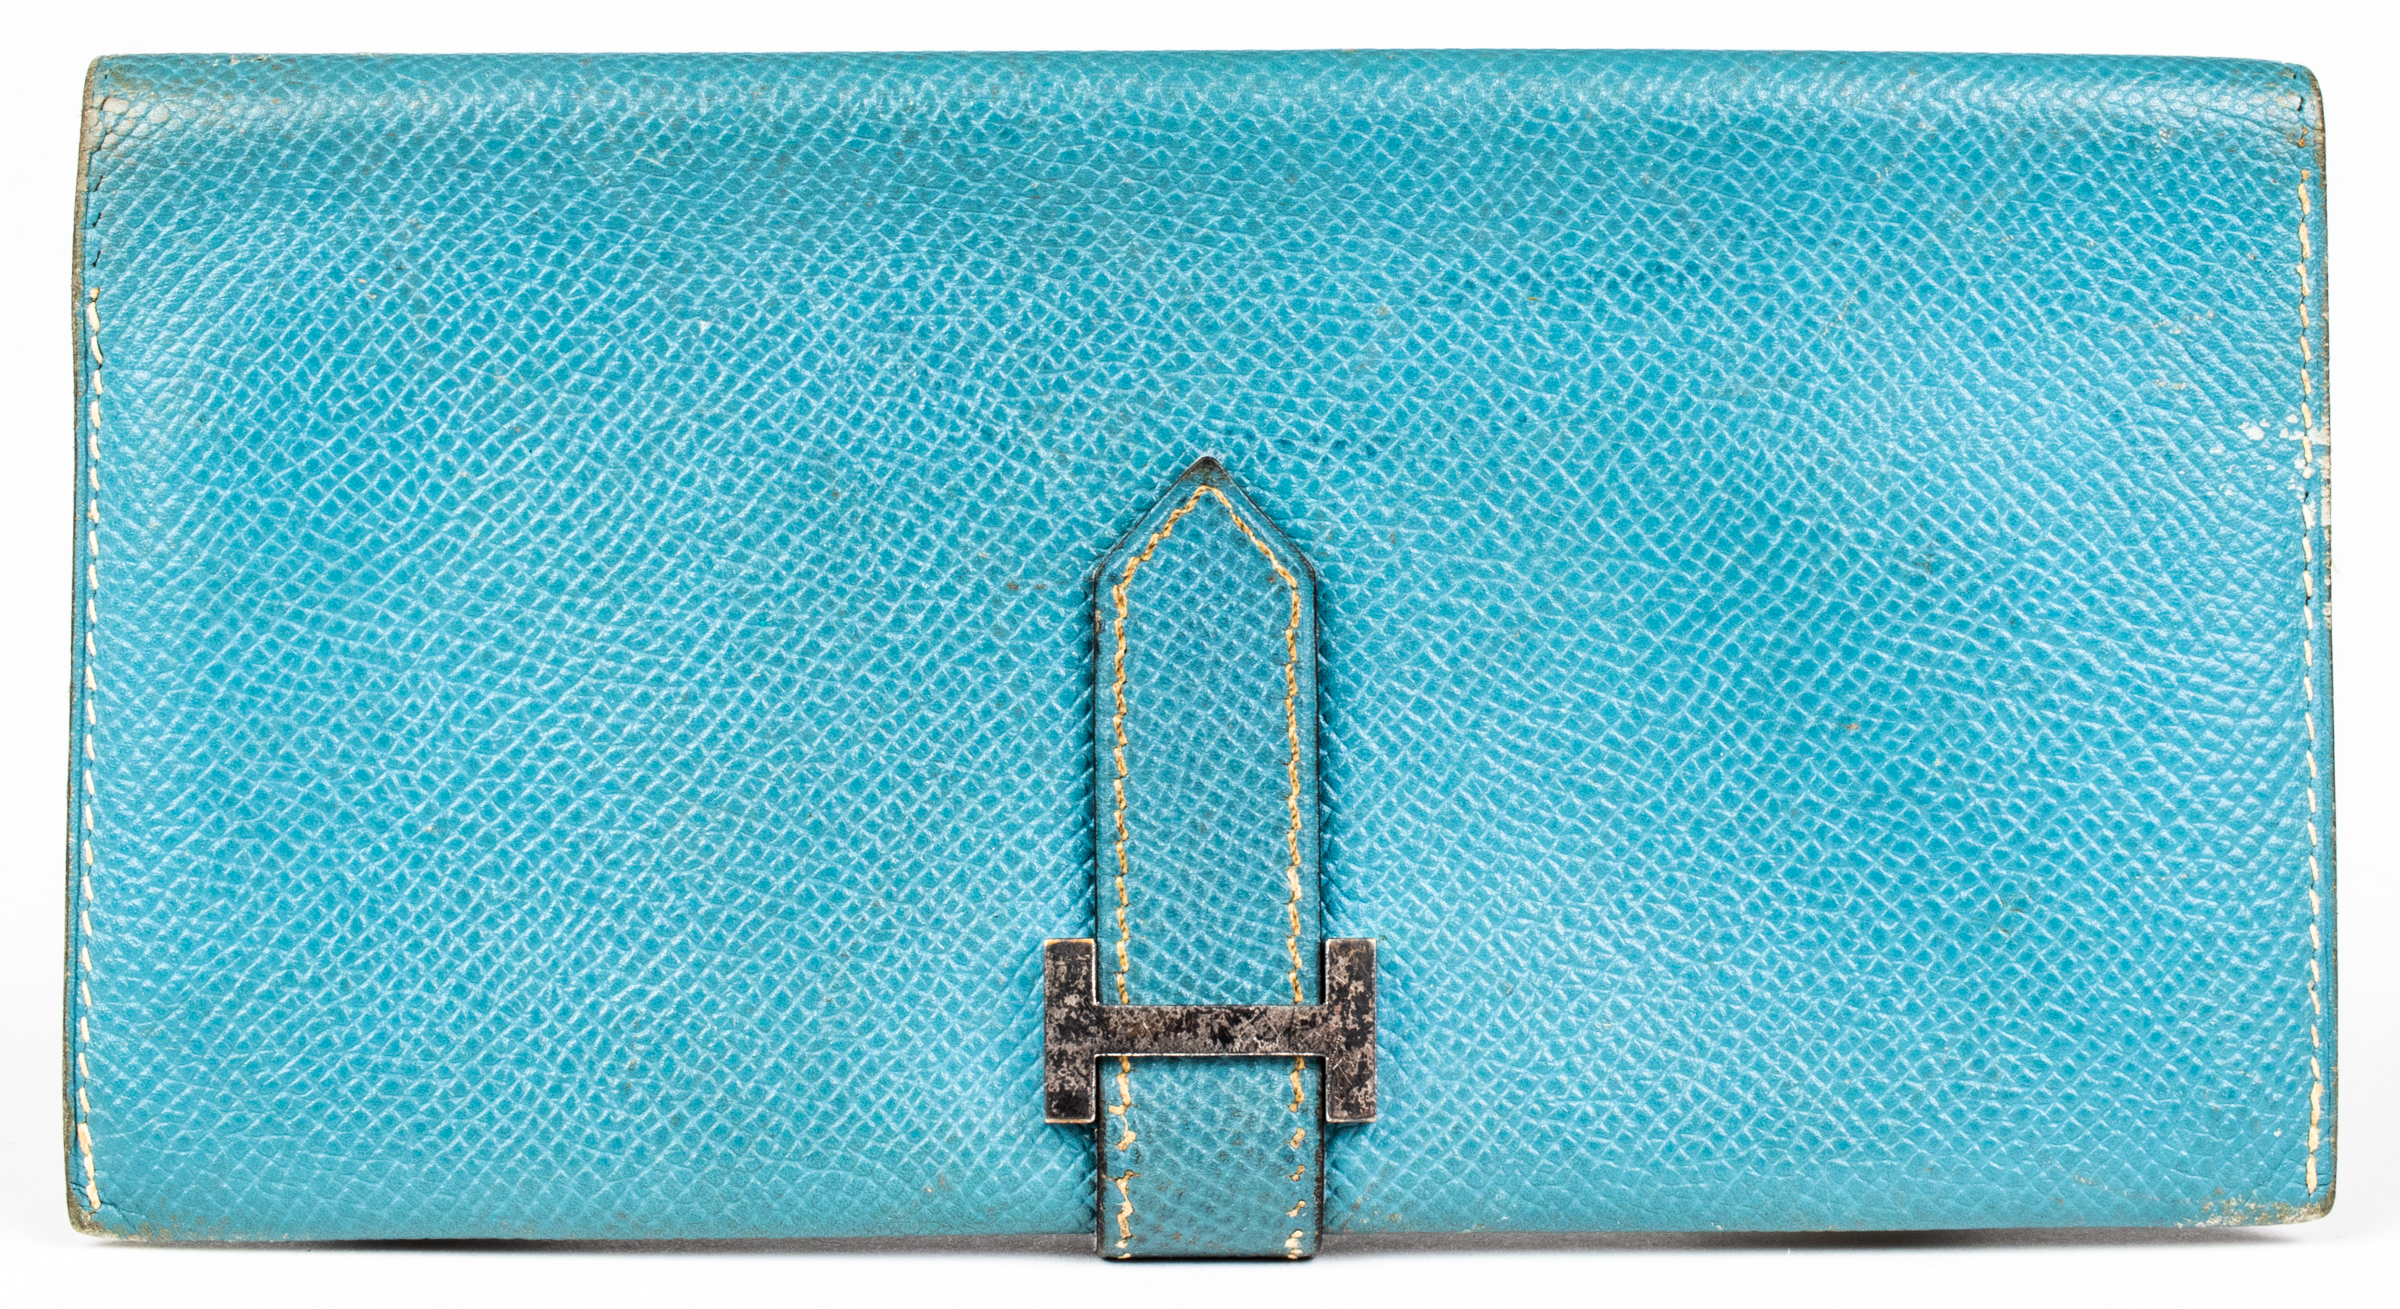 HERMES BLUE LEATHER BEARN WALLET 3c3c1a